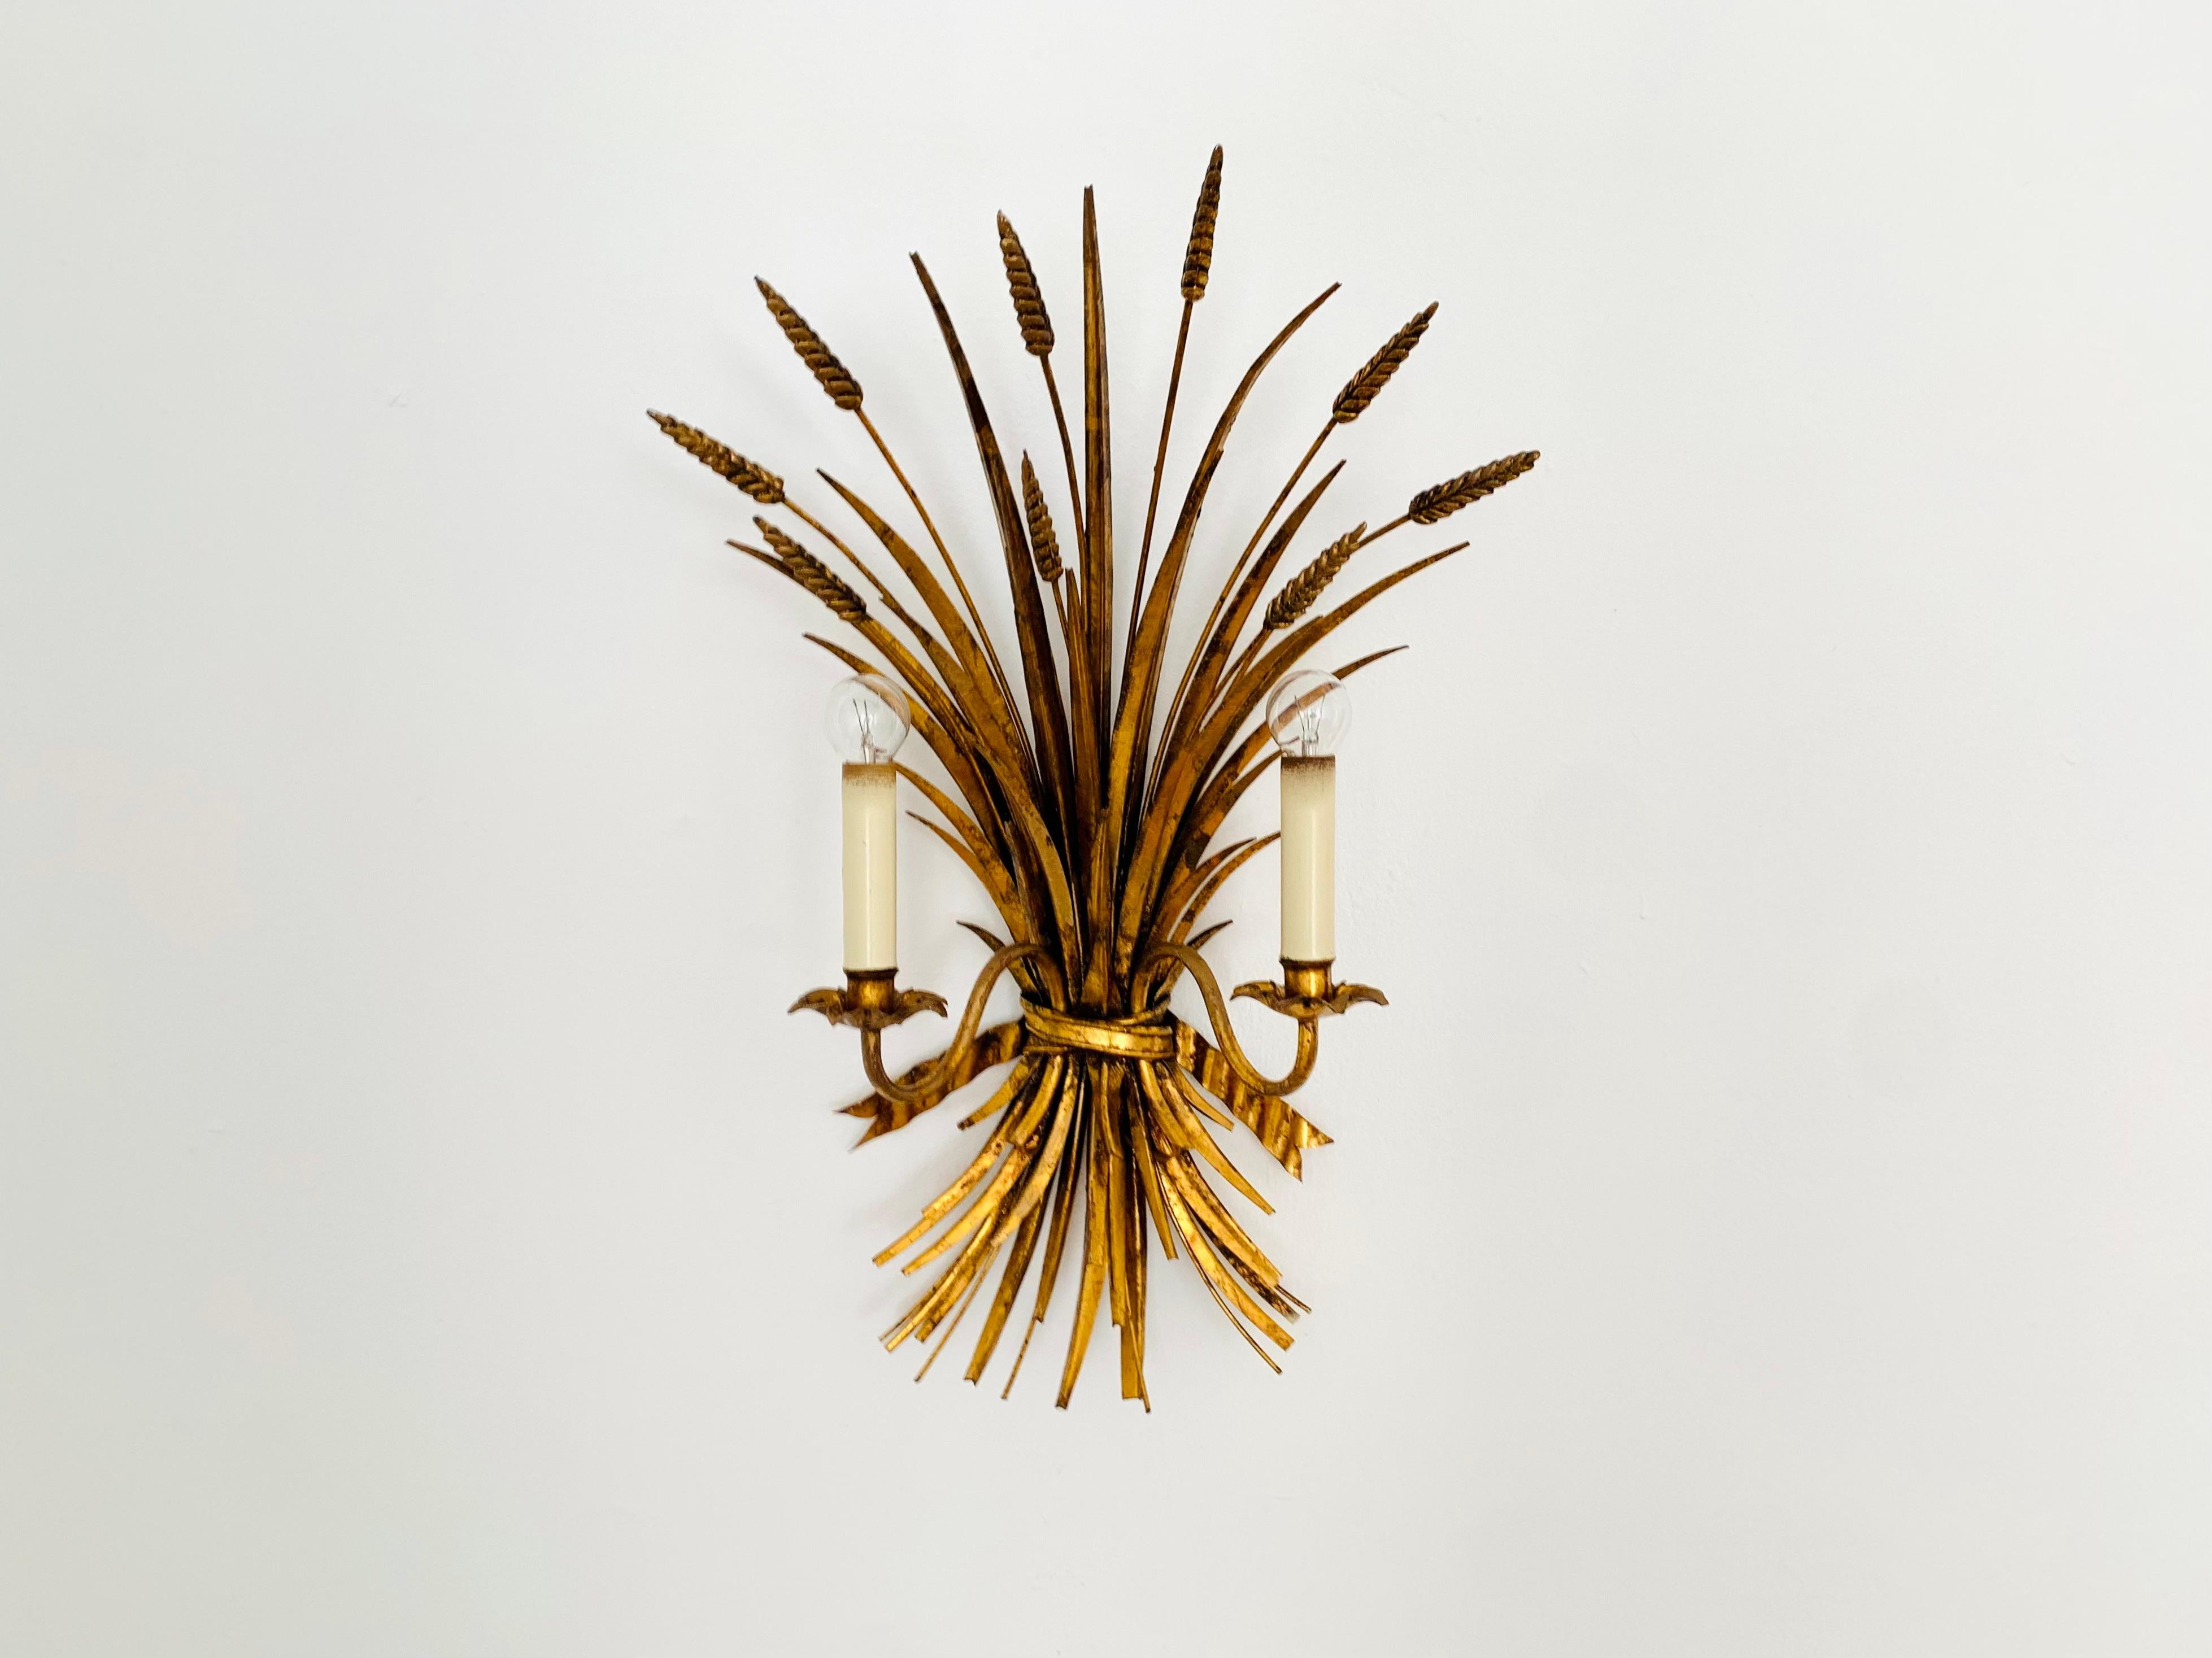 Very nice gilded wall lamp by Hans Kögl from the 1970s.
Great design and high-quality workmanship.
A wonderful play of light is created.

Condition:

Very good vintage condition with slight signs of wear consistent with age.
Spotted patina and loss